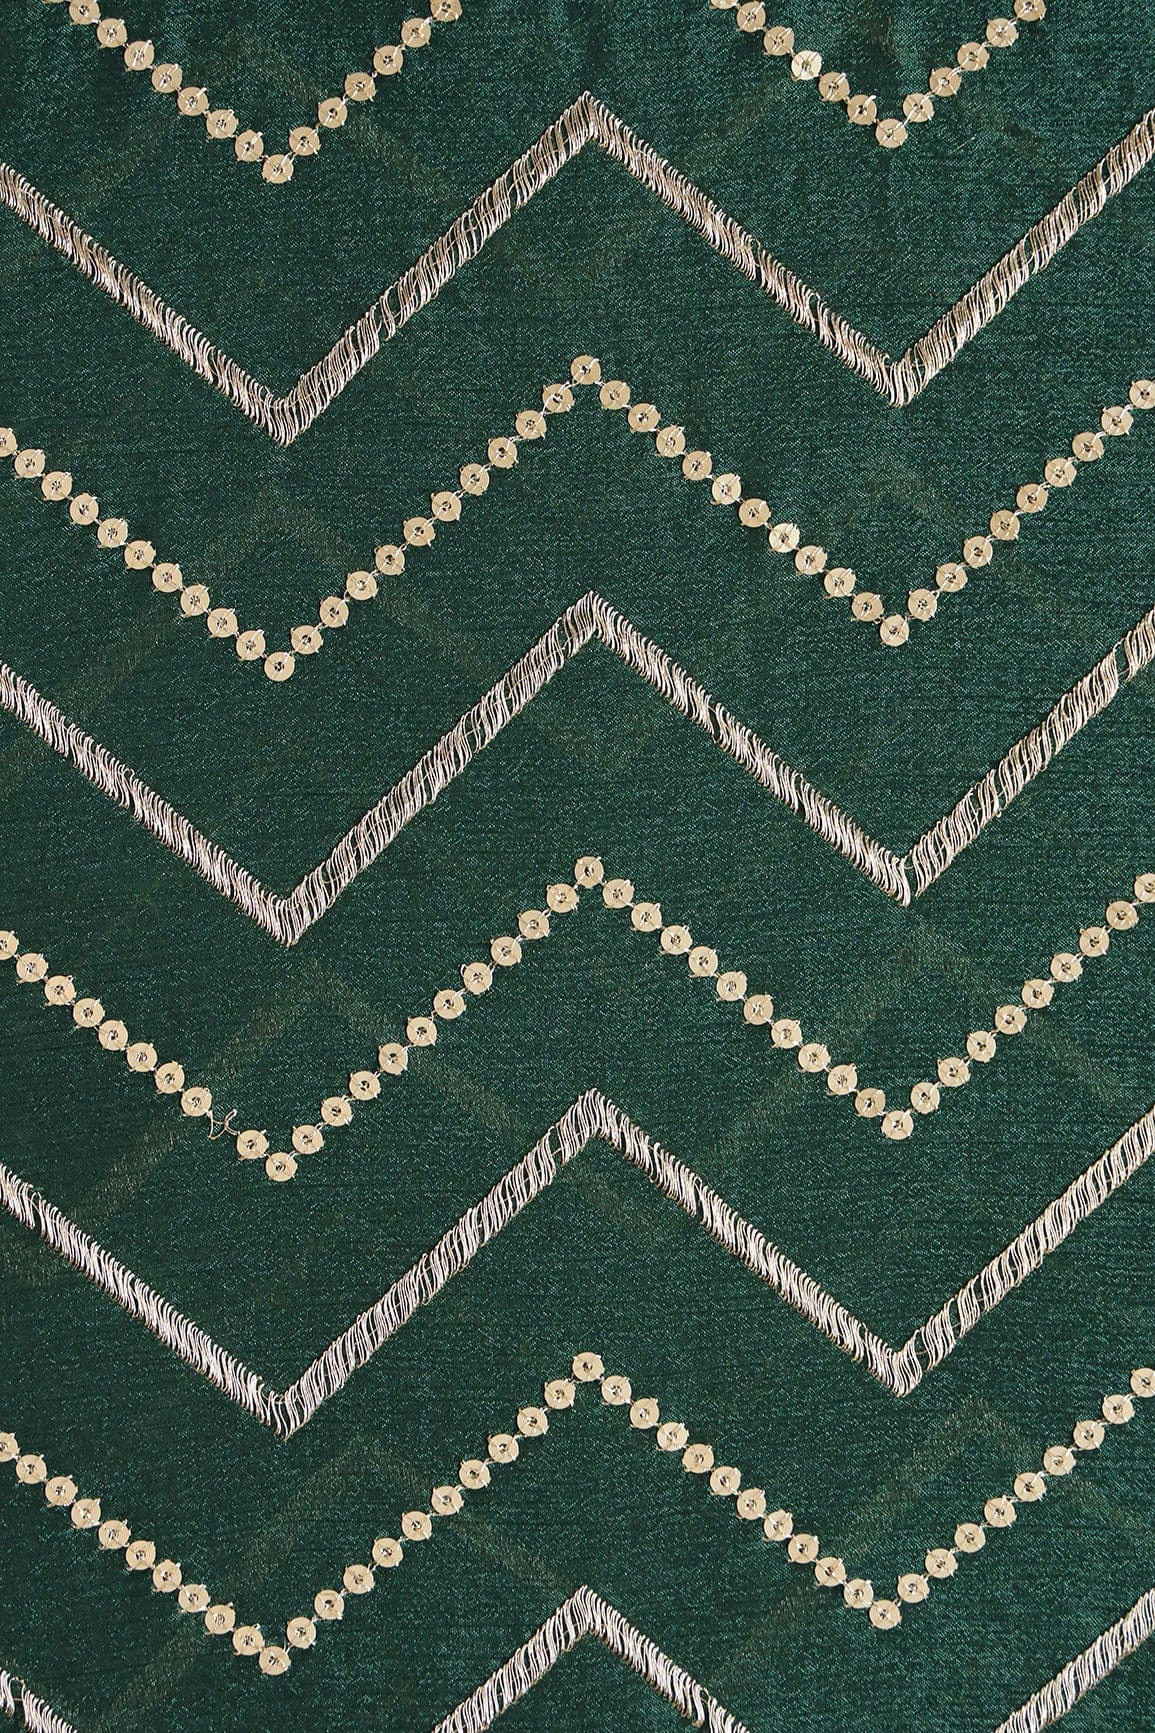 doeraa Embroidery Fabrics 2 Meter Cut Piece Of Gold Zari With Gold Sequins Chevron Embroidery Work On Bottle Green Chinnon Chiffon Fabric